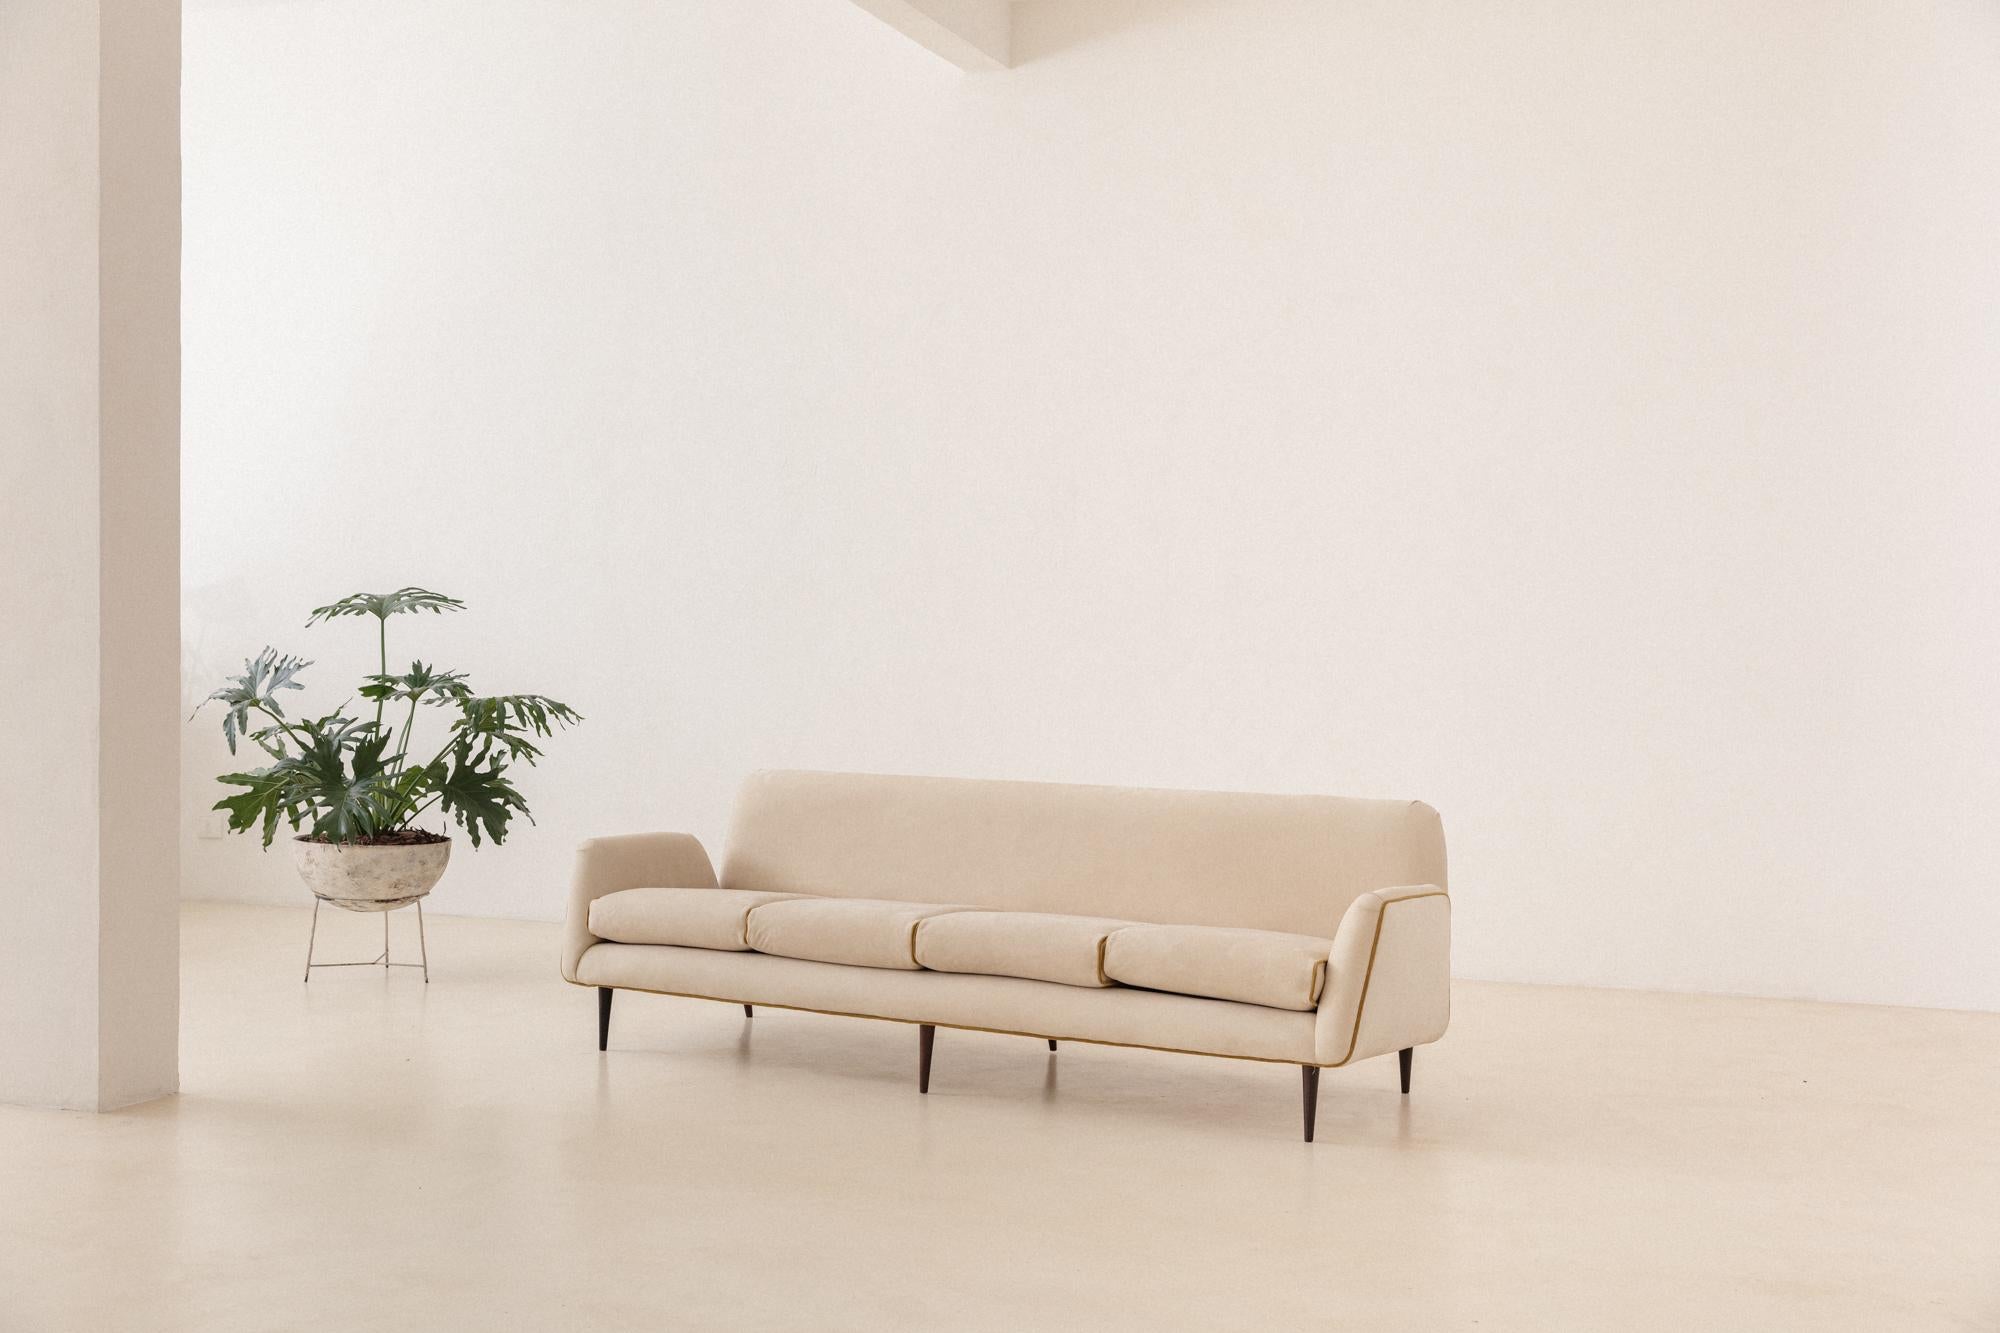 This rare sofa was designed in 1955 and produced by Forma, a company directed by Carlo Hauner (1927- 1996) and Martin Eisler (1913- 1977). This piece is an icon and illustrates some advertisements for the company in the 1950s, besides its matching